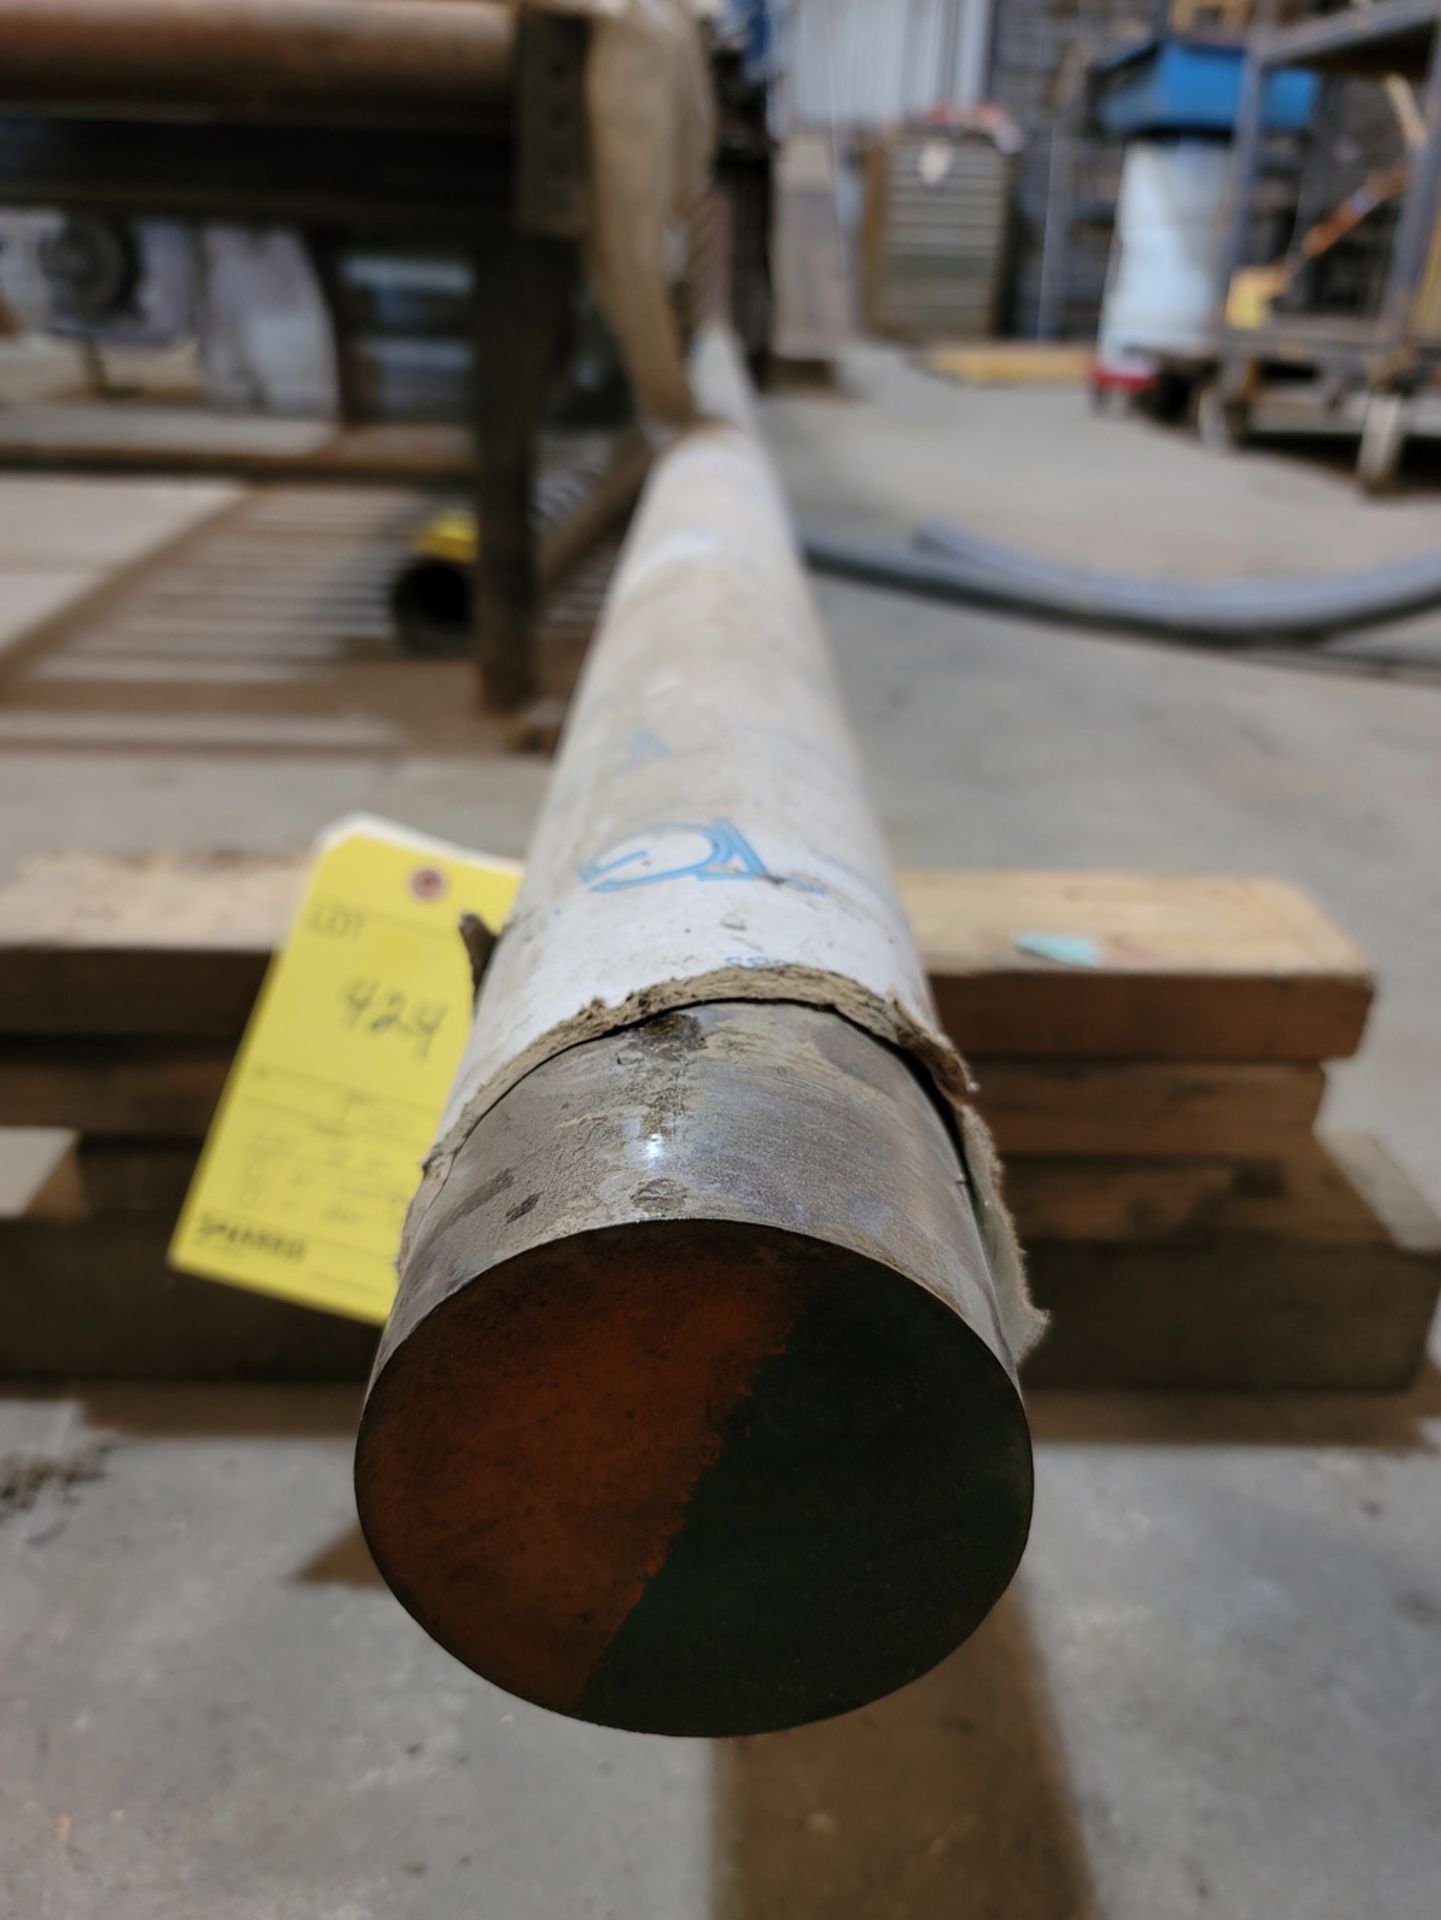 Lot of 2: (1) 35' Stainless Steel Solid Bar, (1) 15' Aluminum Tube - Image 4 of 4